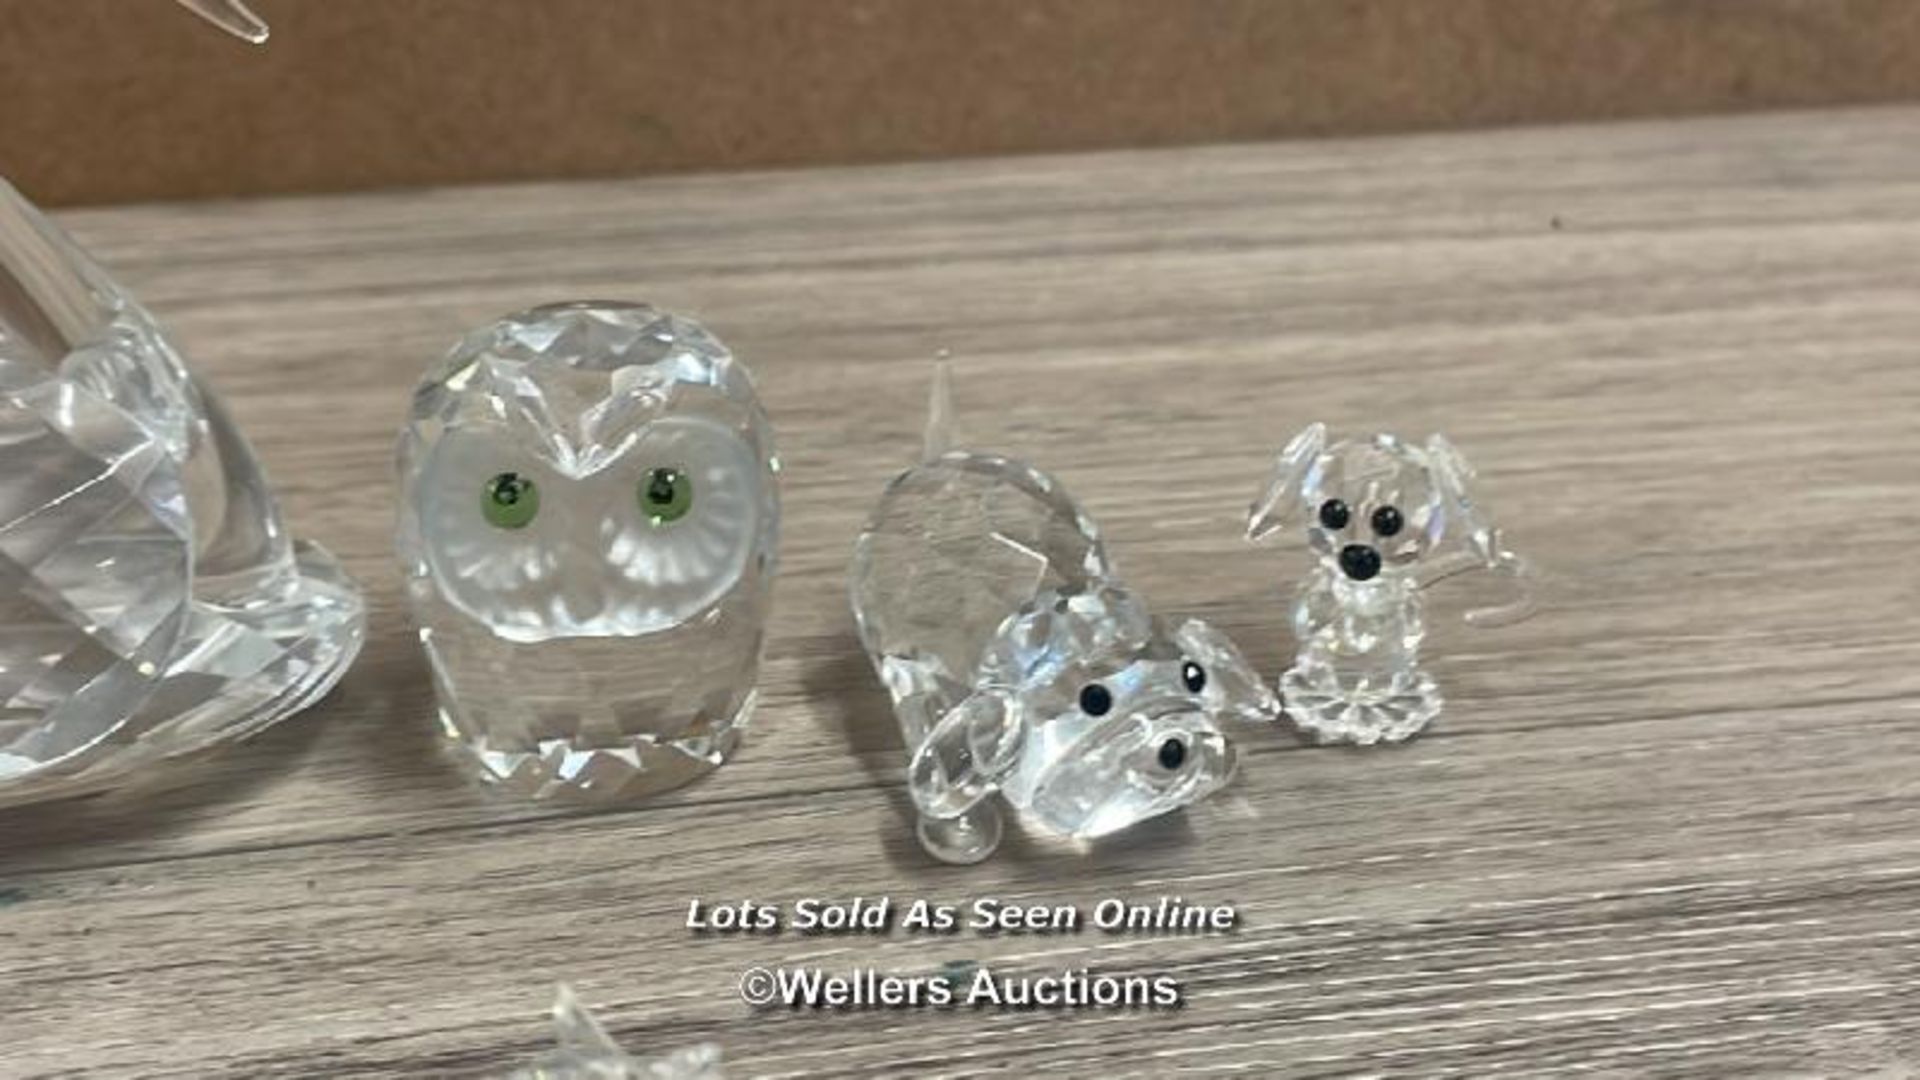 NINE CHRISTAL ANIMALS MARKED SWAROVSKY WITH SIX MORE UNMARKED AND SMALL CHRYSTAL BALL (16) - Image 6 of 6